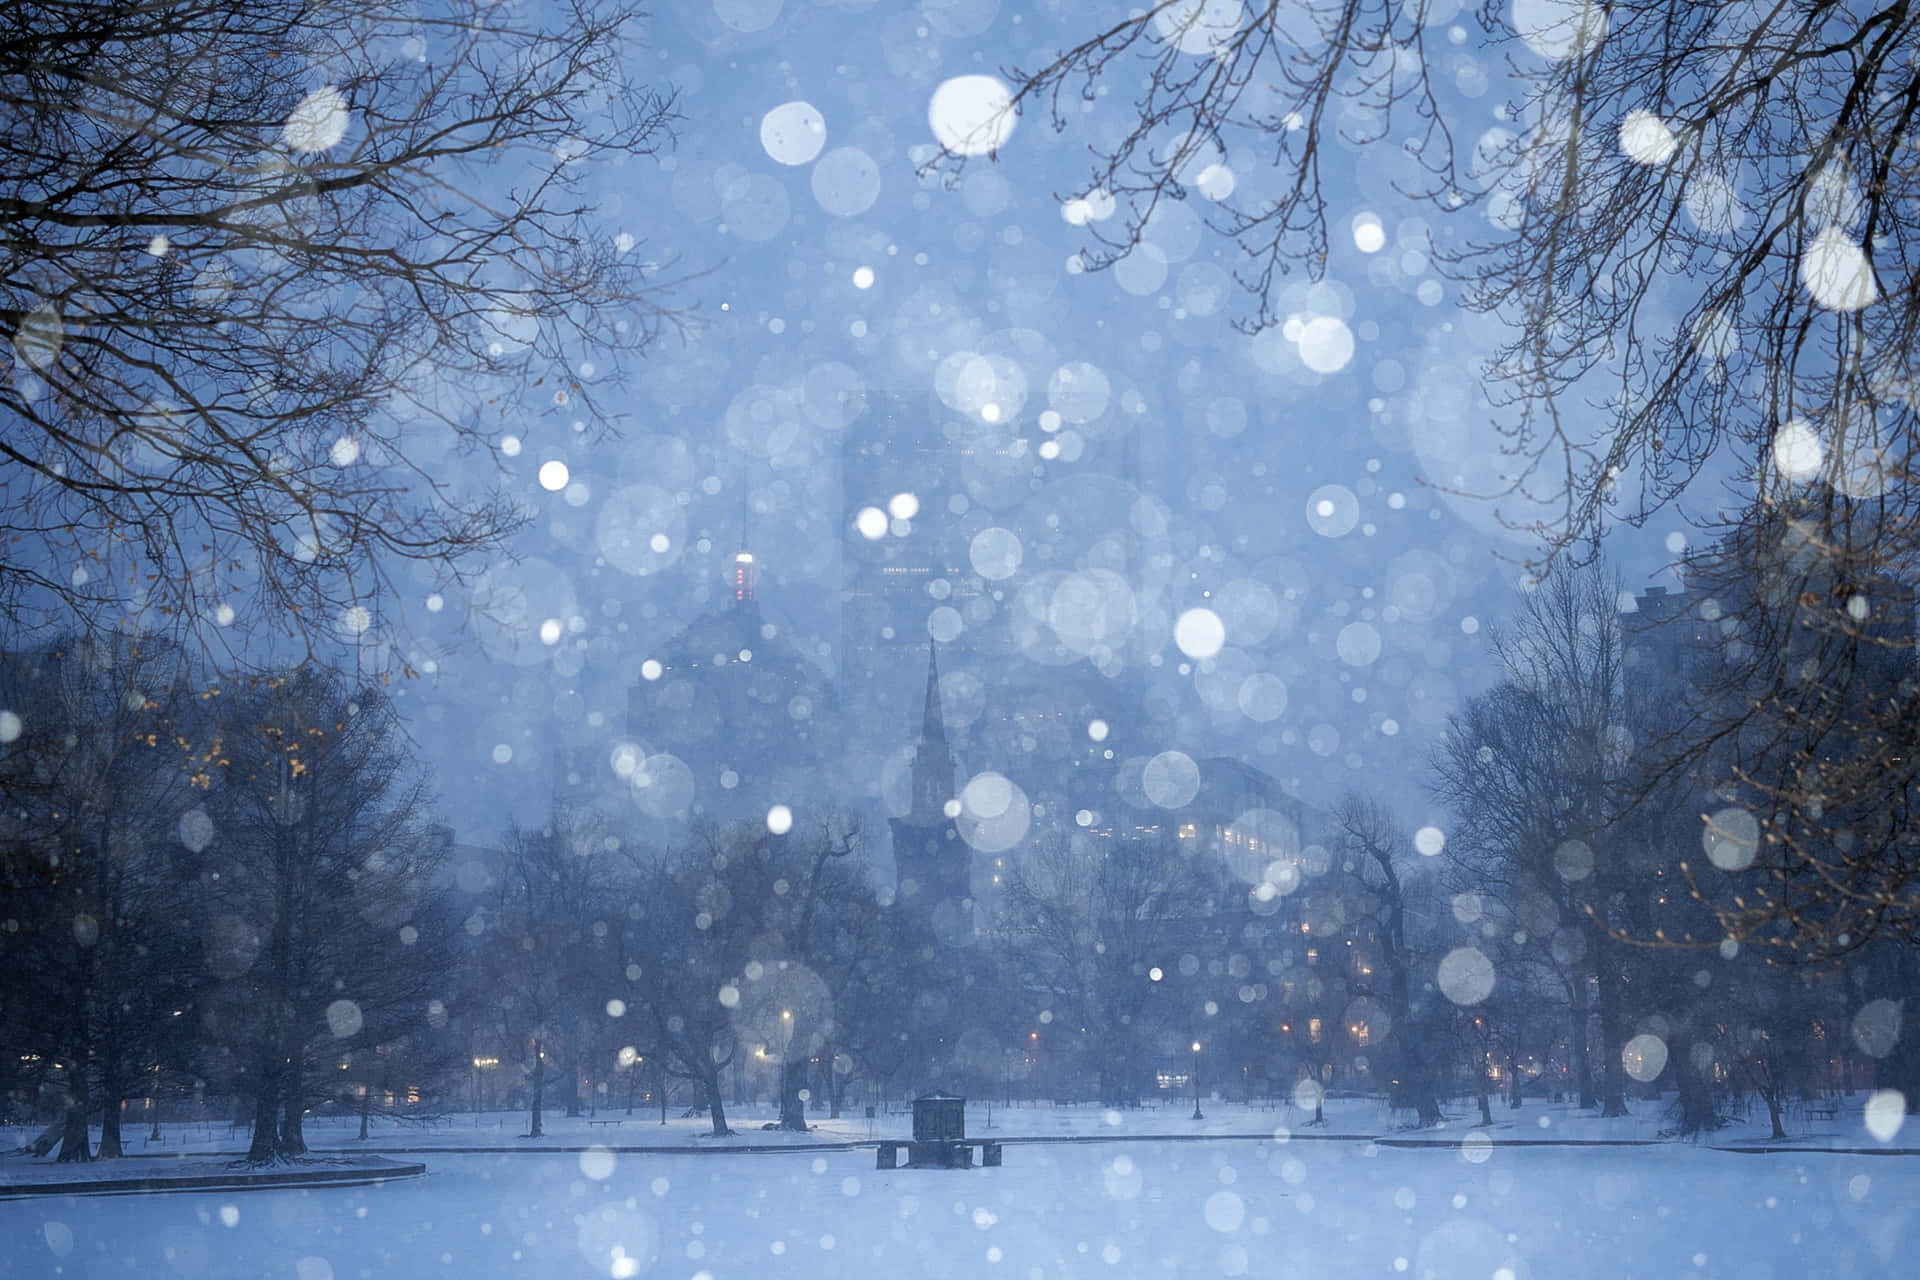 Enjoy a peaceful view of snowflakes falling on a tranquil winter's day.